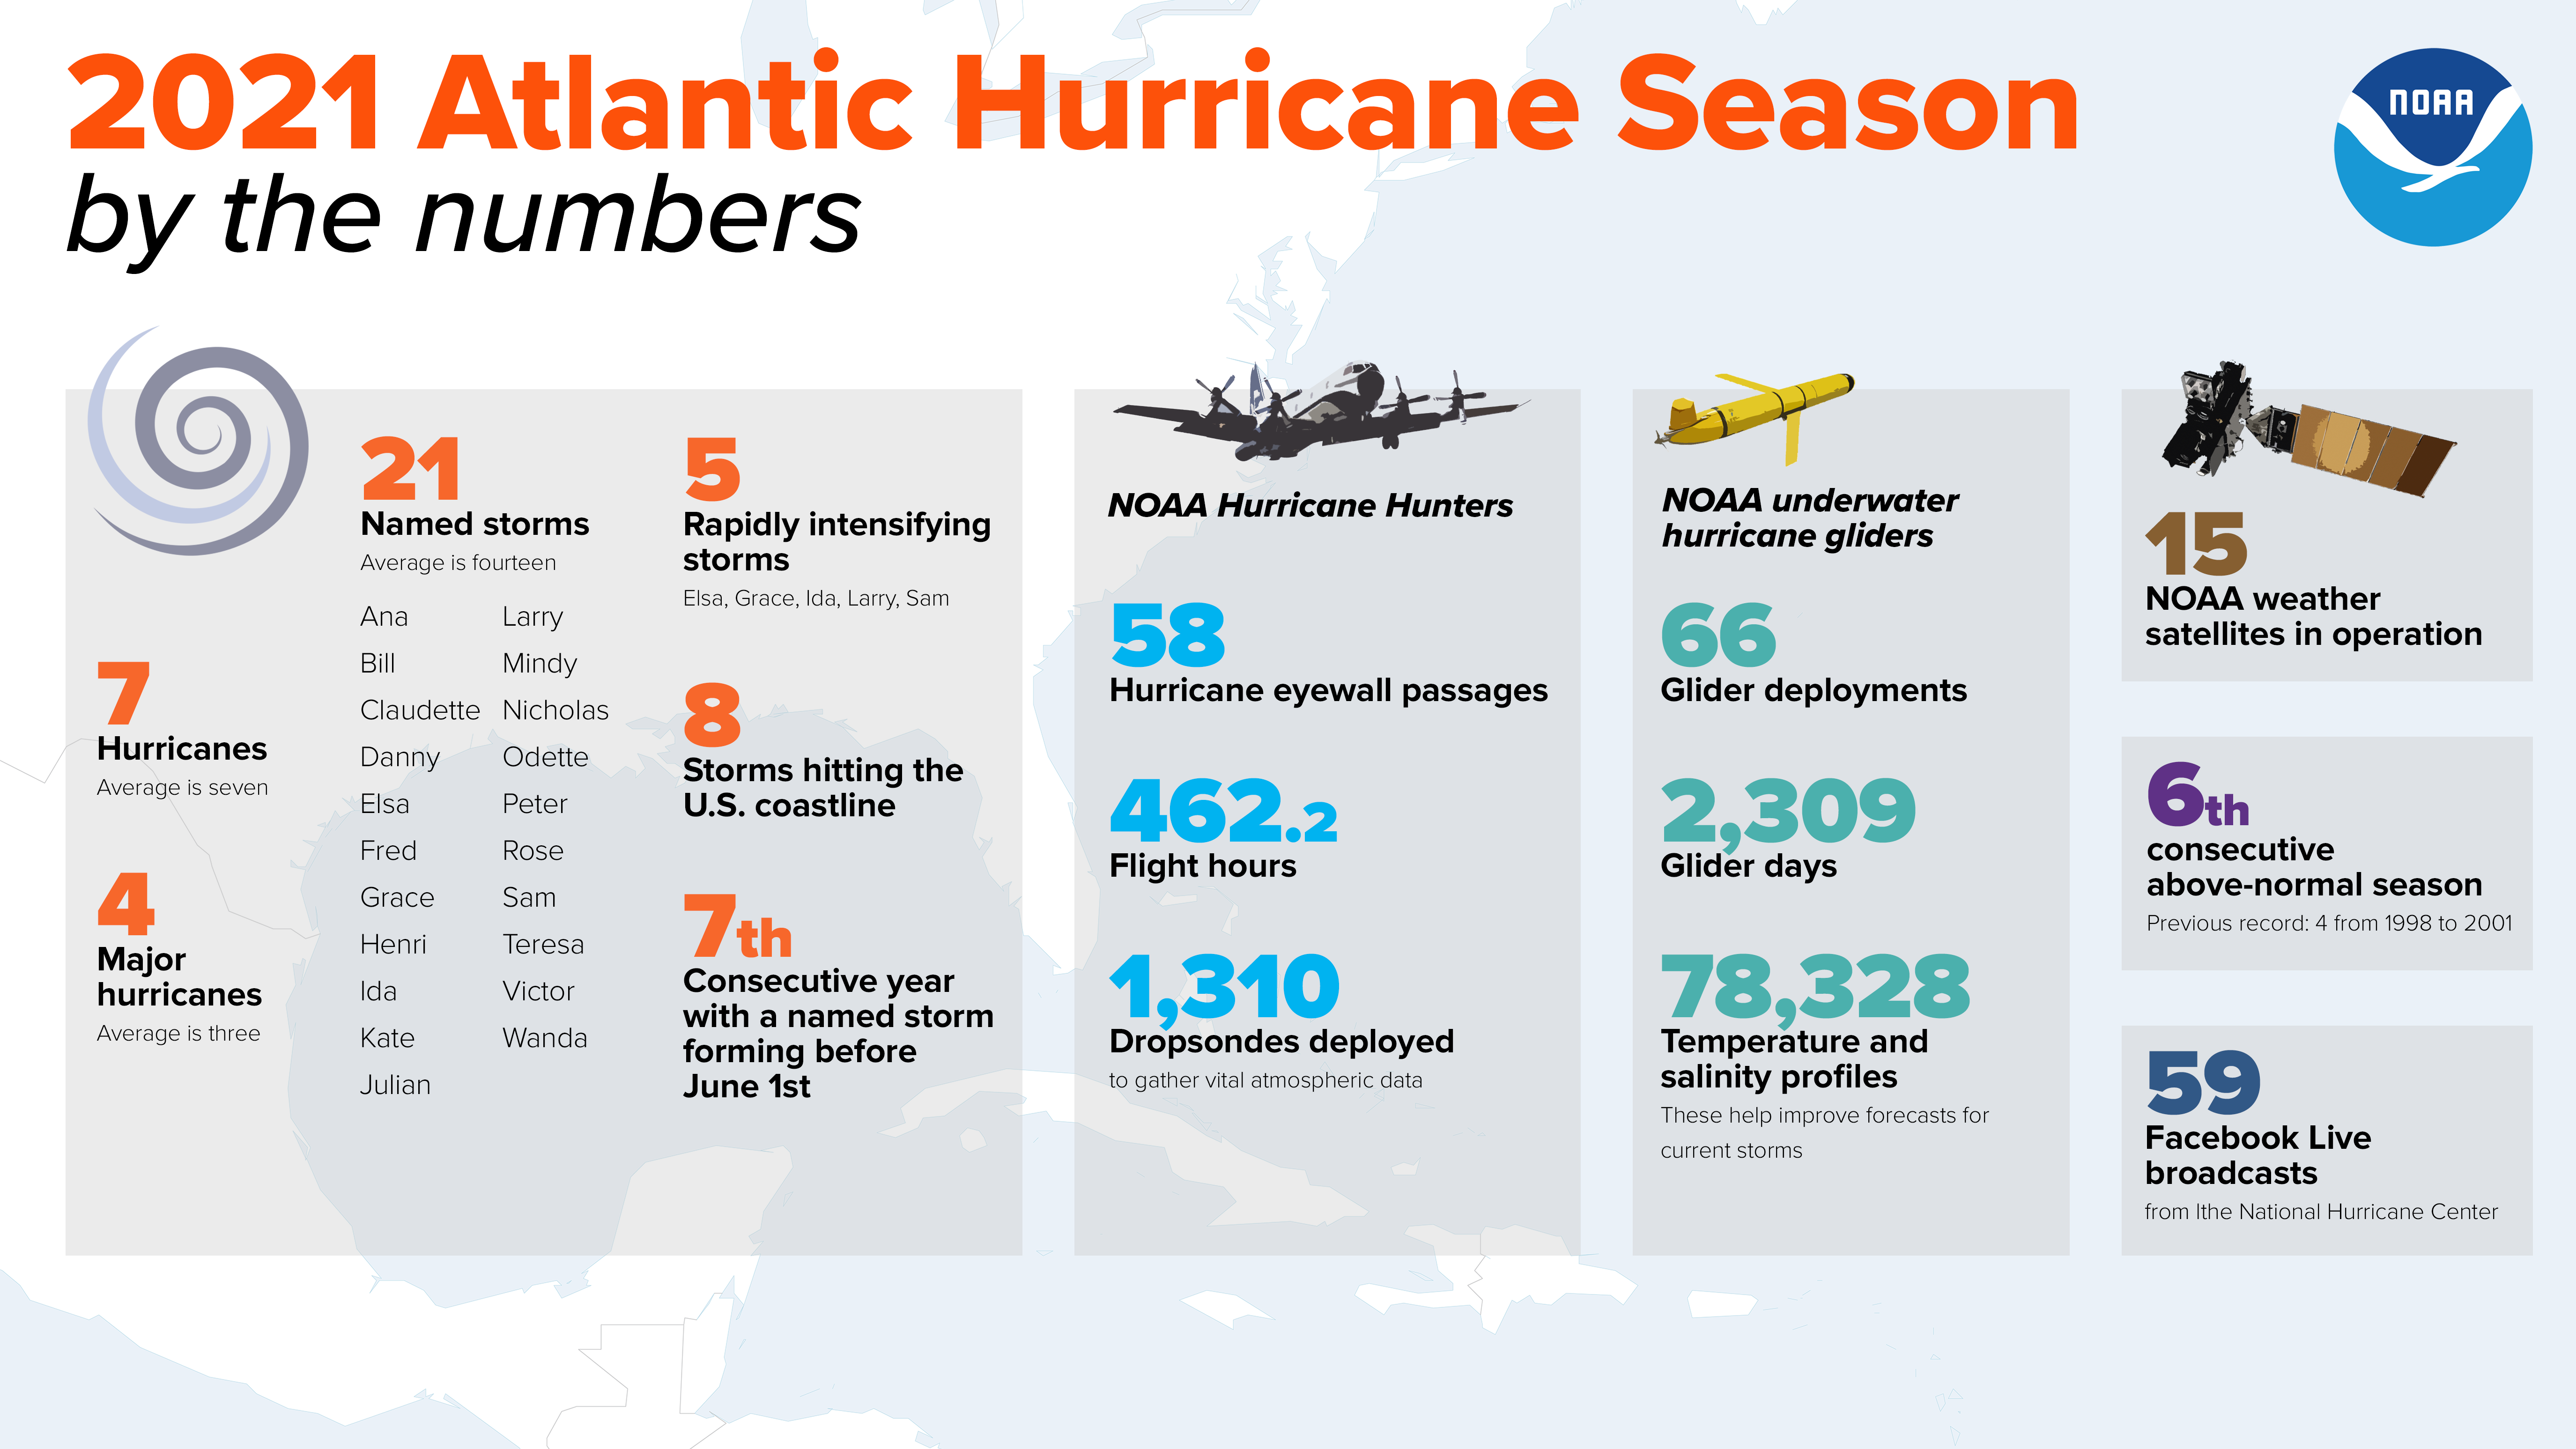 This infographic highlights key facts and statistics from the 2021 Atlantic Hurricane Season. The Atlantic hurricane season officially ends November 30, but storm activity in the tropics can sometimes continue beyond that date.